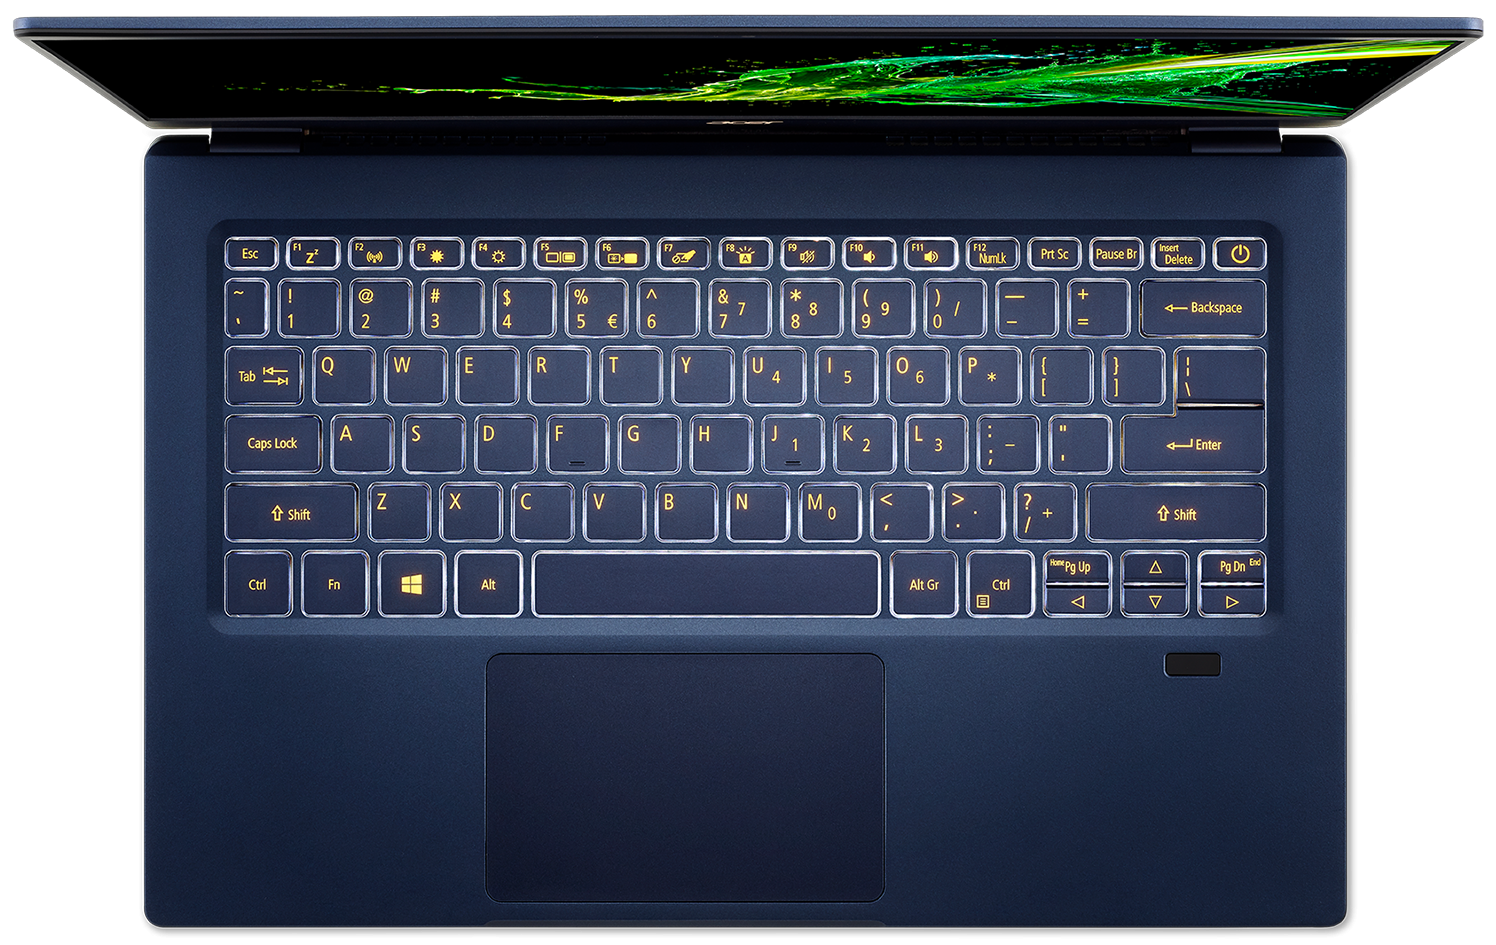 Acer Swift 5 (SF514-54T / Pro SF514-54GT) - Specs, Tests, and